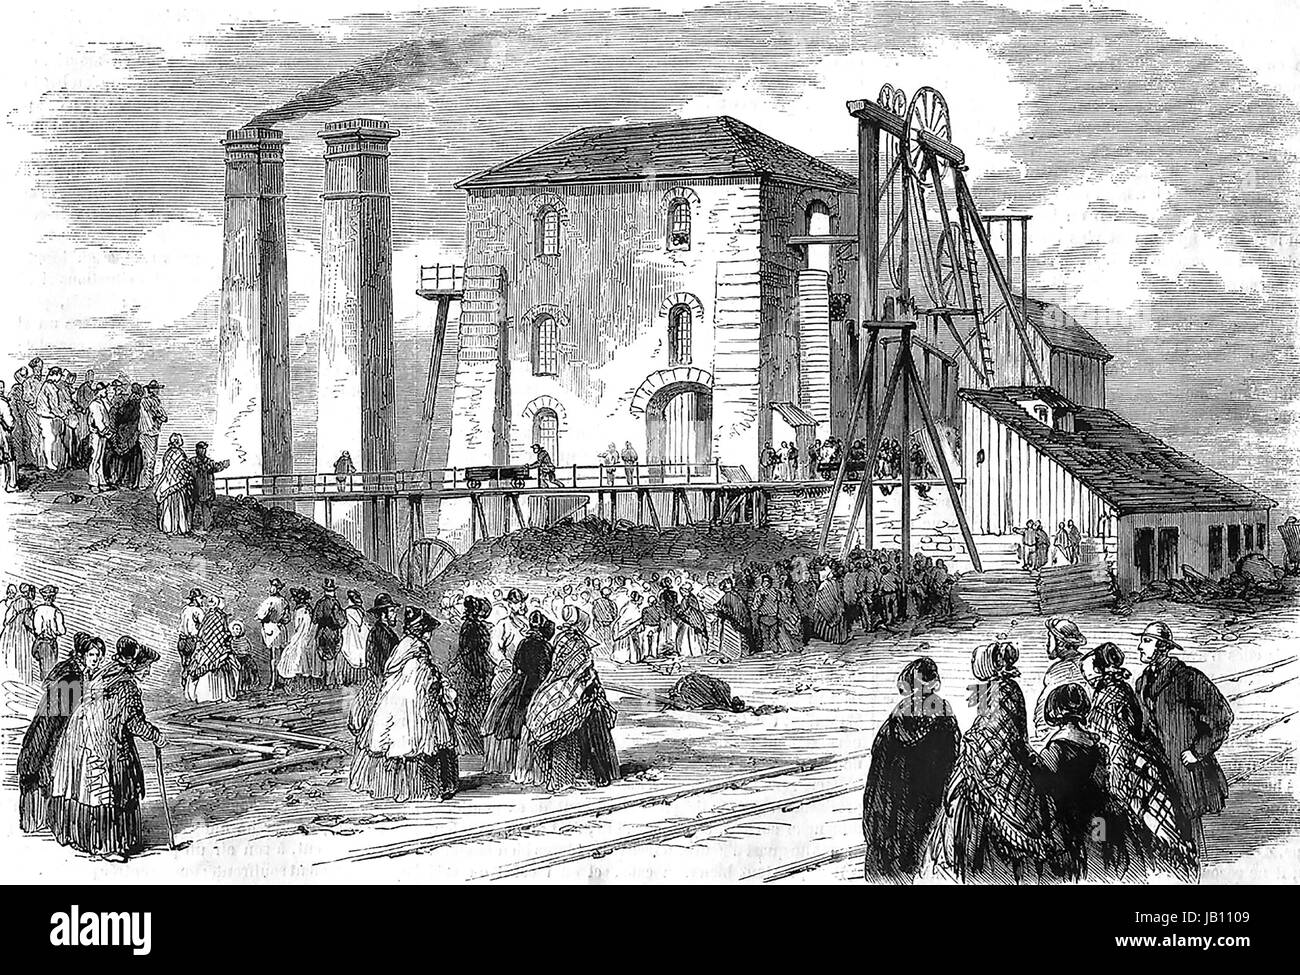 HARTLEY COLLIERY DISASTER 16 January 1862. Crowds outside the Northumberland coal mine after a pumping engine broke resulting in the death of 204 miners. Stock Photo